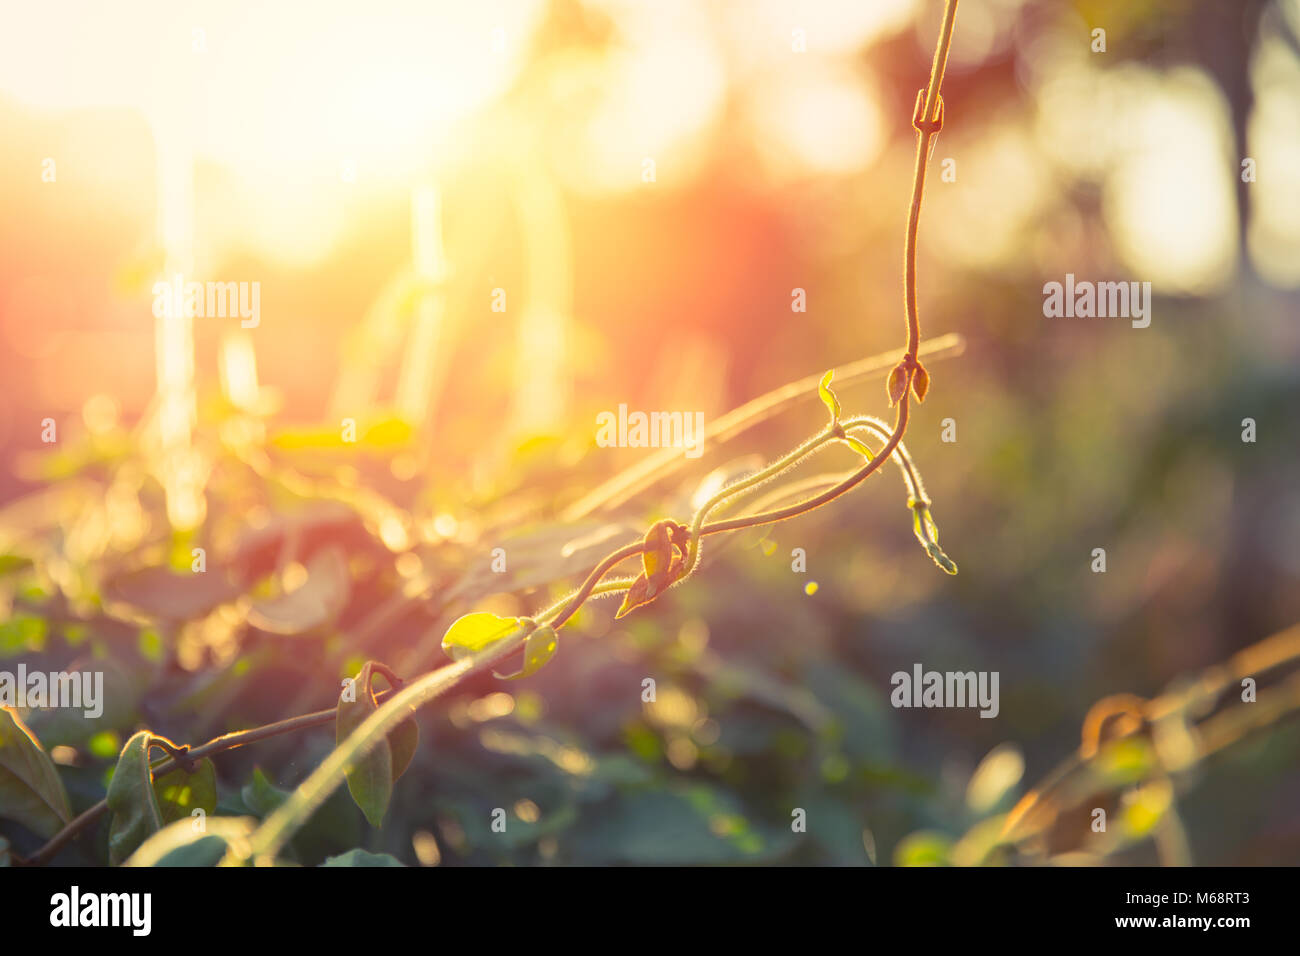 Vine creeping plant with sunlight shallow depth of field Stock Photo